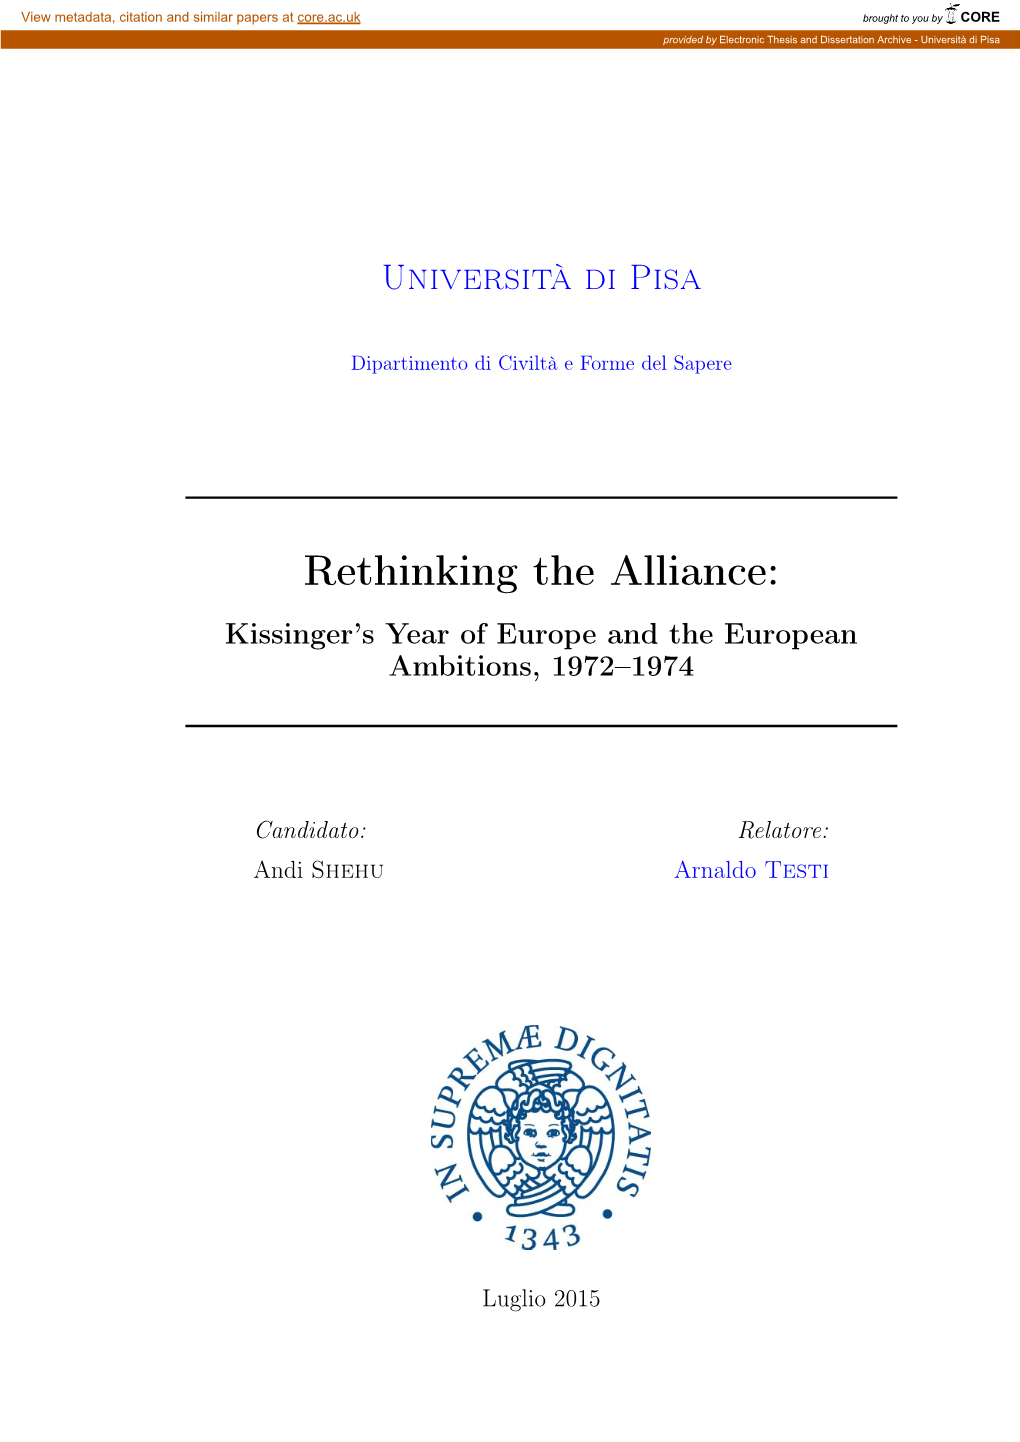 Rethinking the Alliance: Kissinger’S Year of Europe and the European Ambitions, 1972–1974